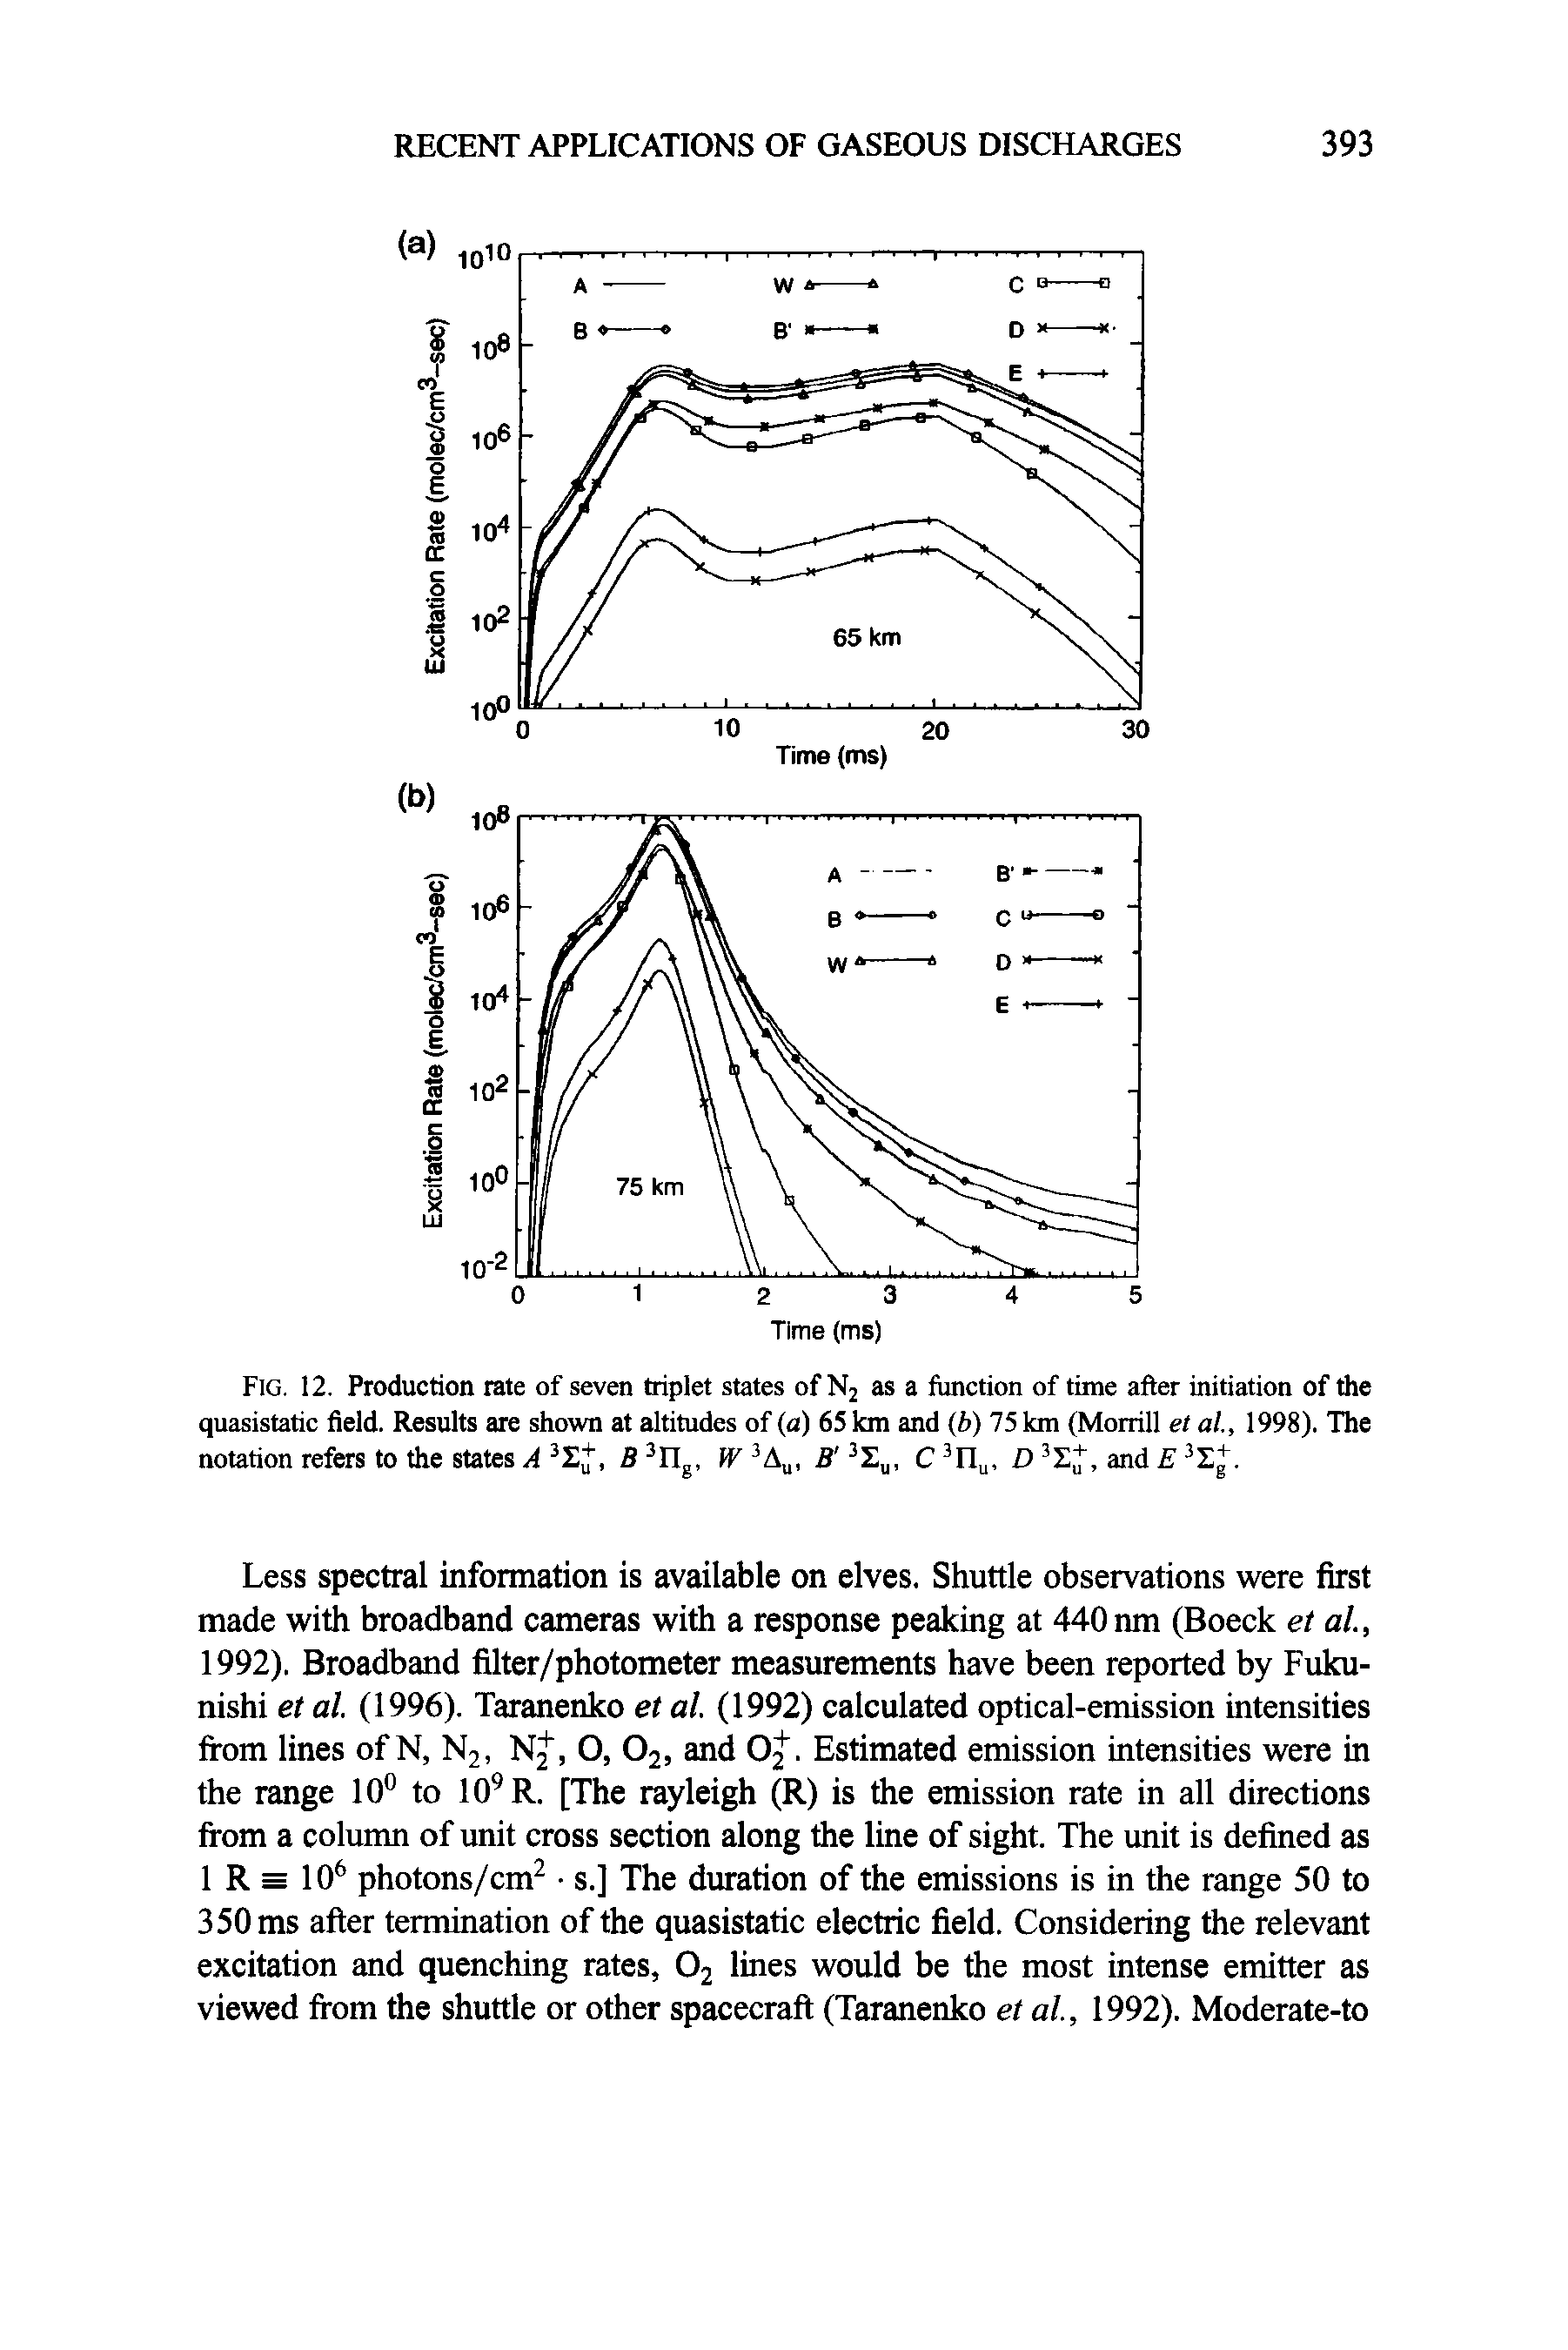 Fig. 12. Production rate of seven triplet states of N2 as a fiaiction of time after initiation of the quasistatic field. Results are shown at altitudes of (a) 65 km and (b) 75 km (Morrill et al, 1998). The notation refers to the states A, B Ilg, W B C D, and E. ...